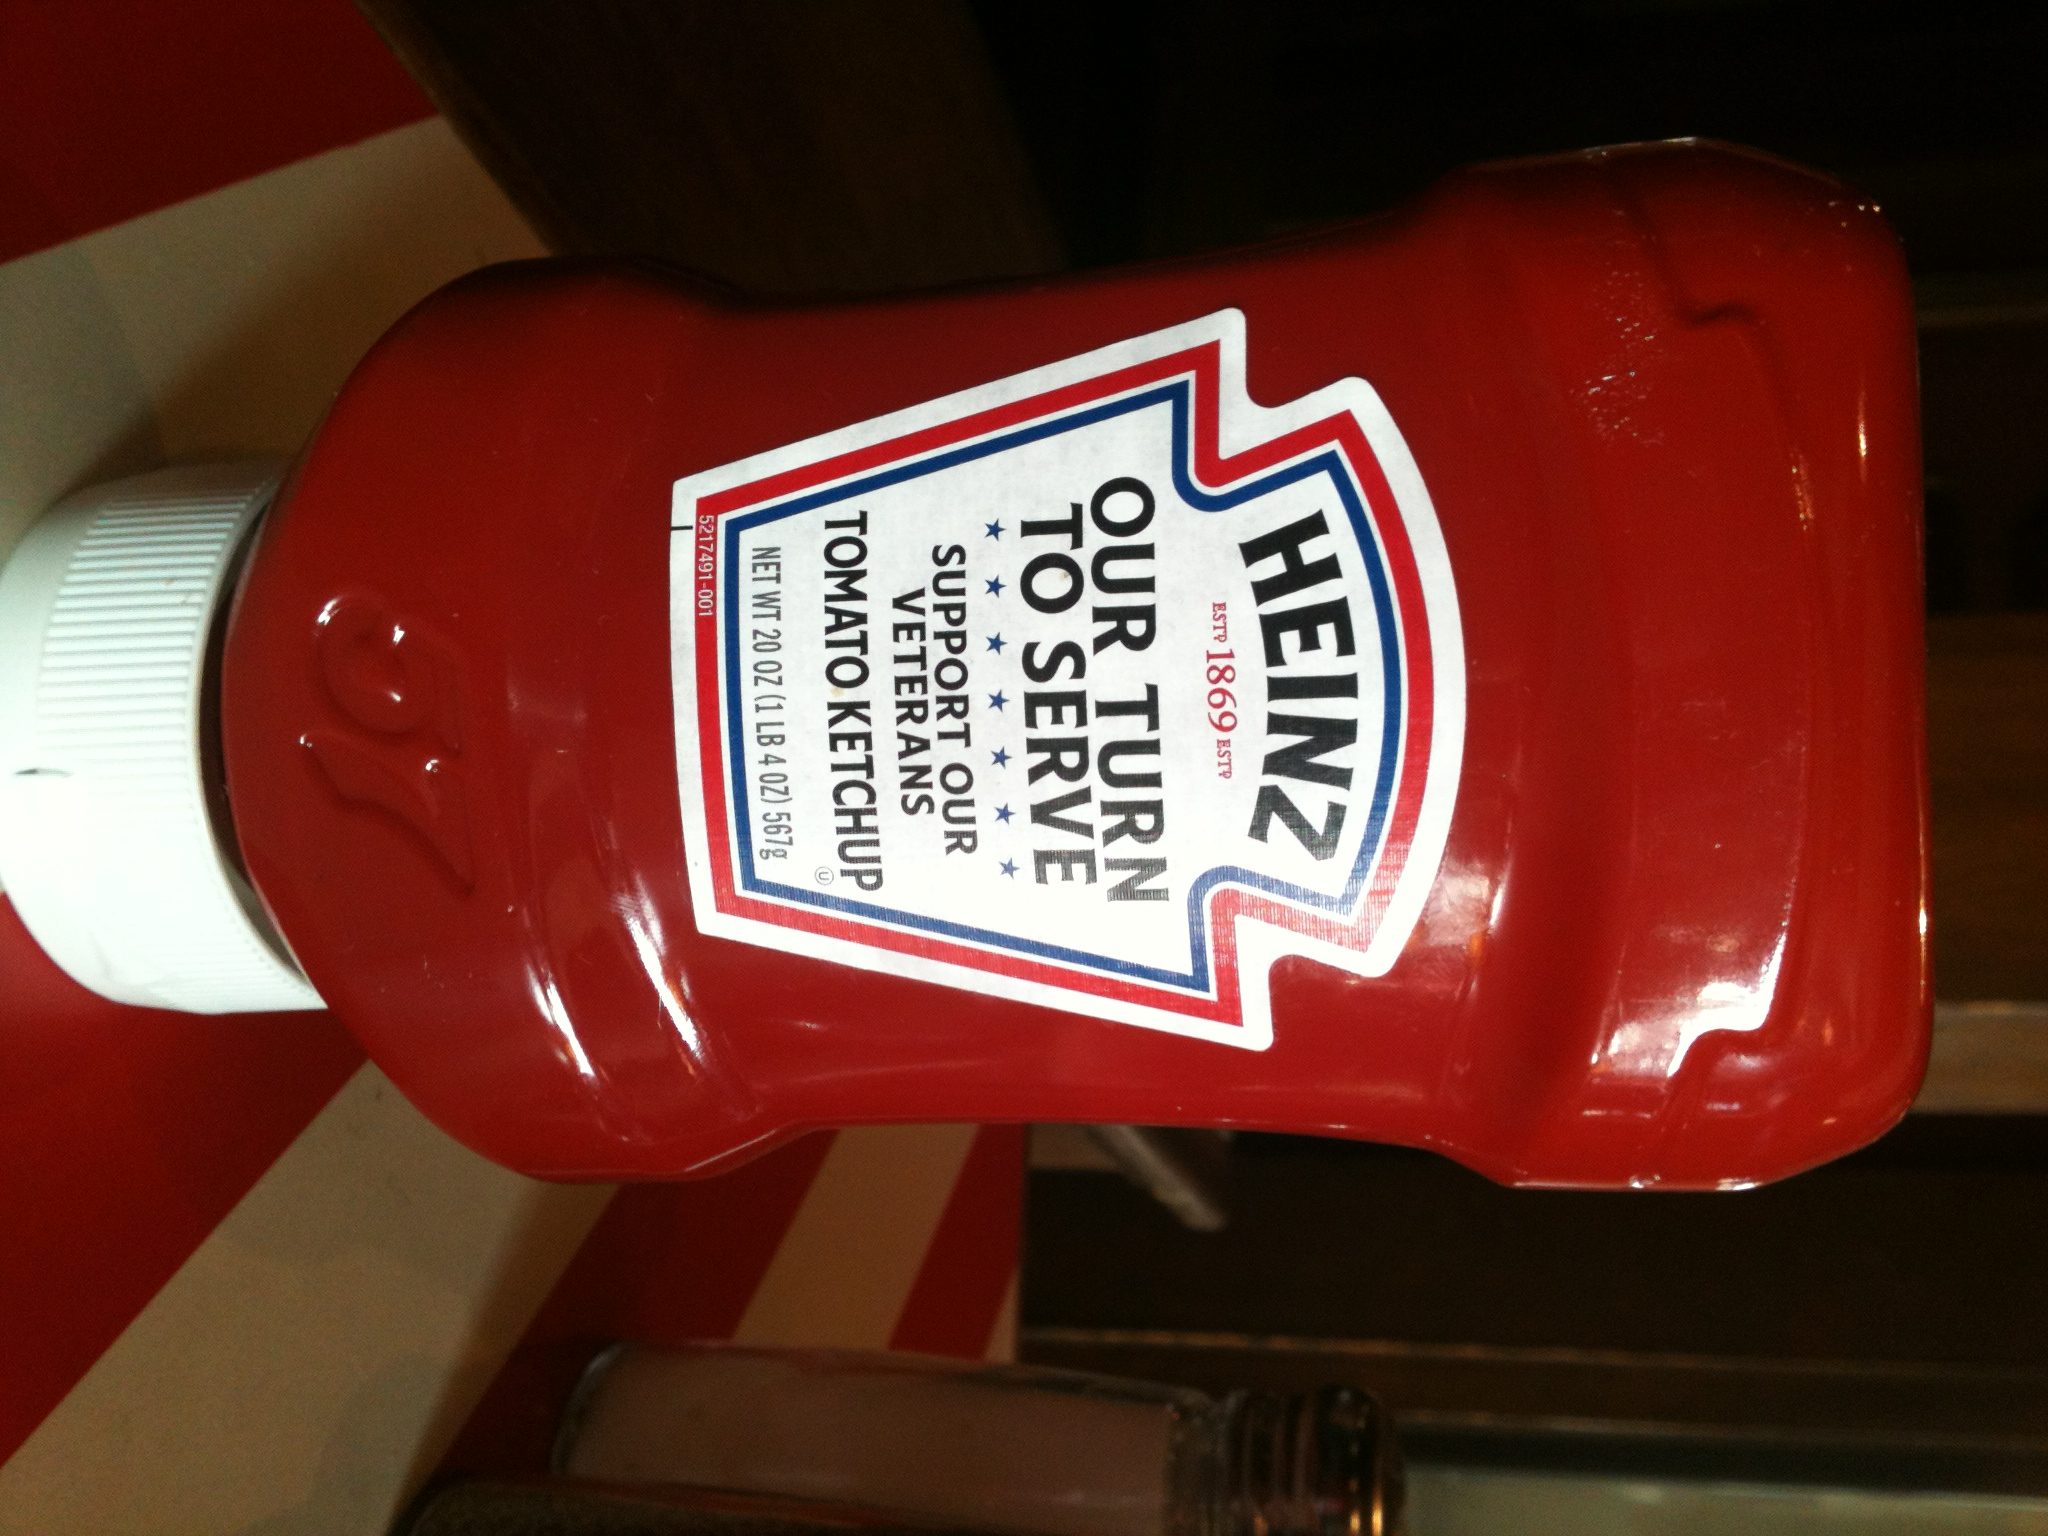 Heinz message on Packaging is Part of Product or Promotion